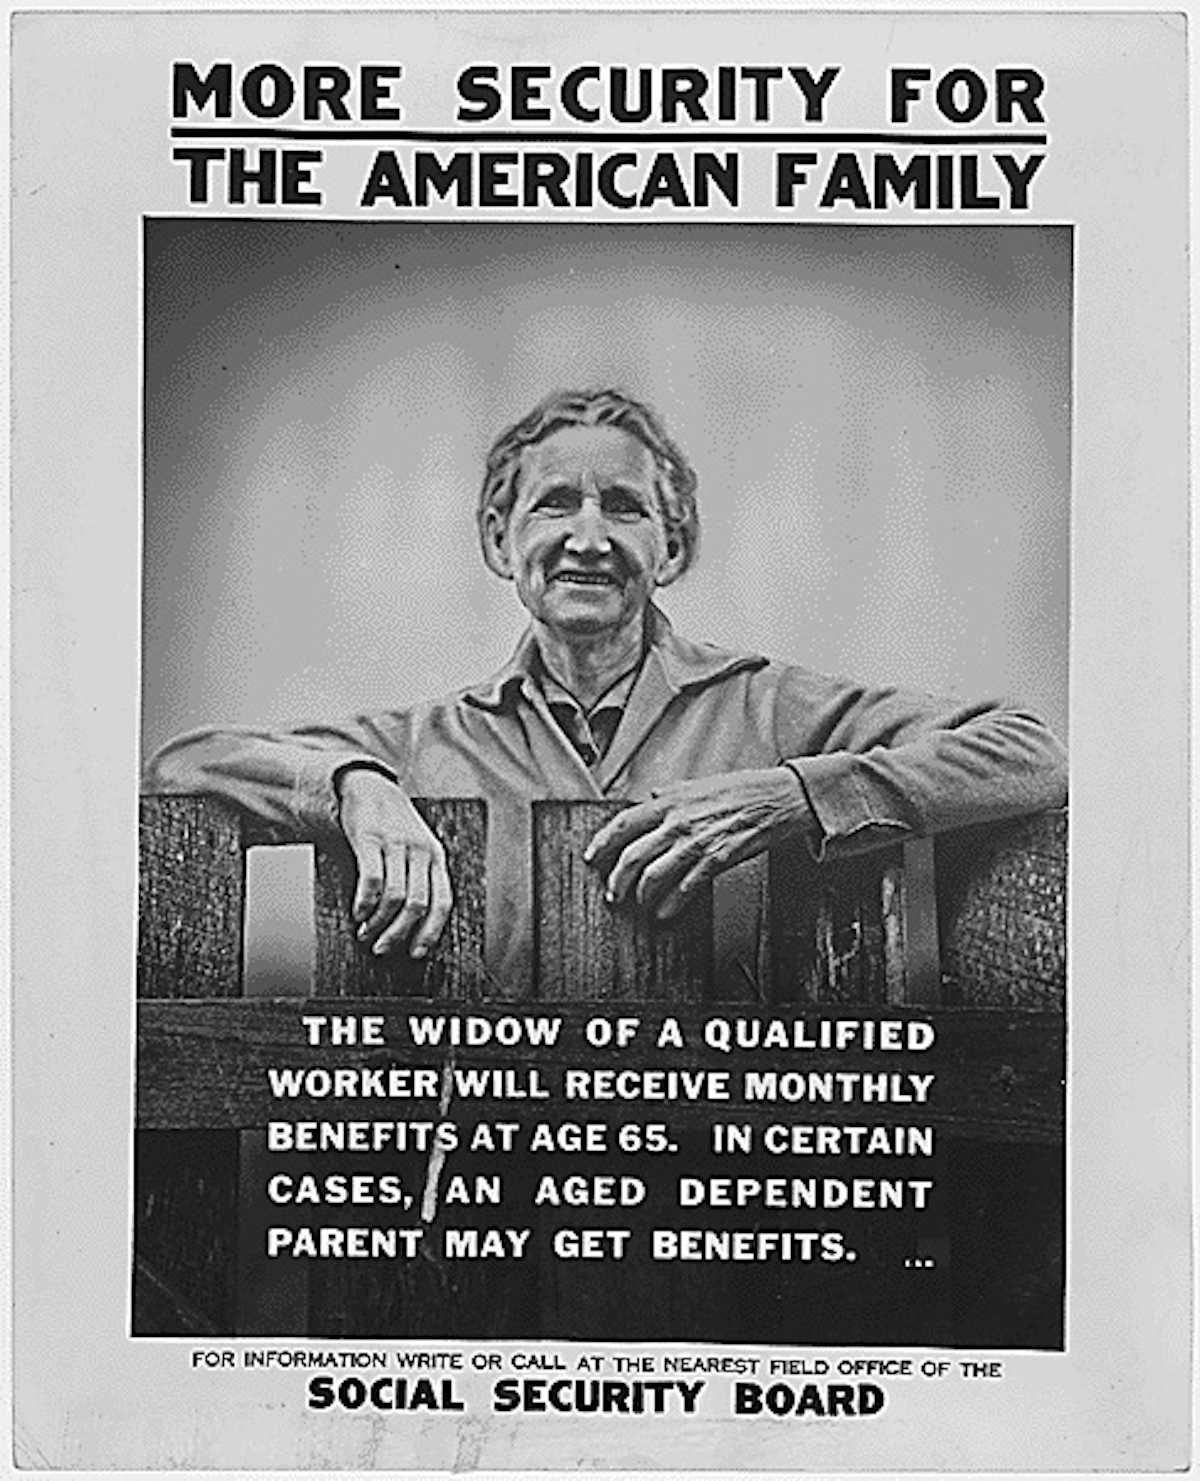 how-racism-has-shaped-welfare-policy-in-america-since-1935